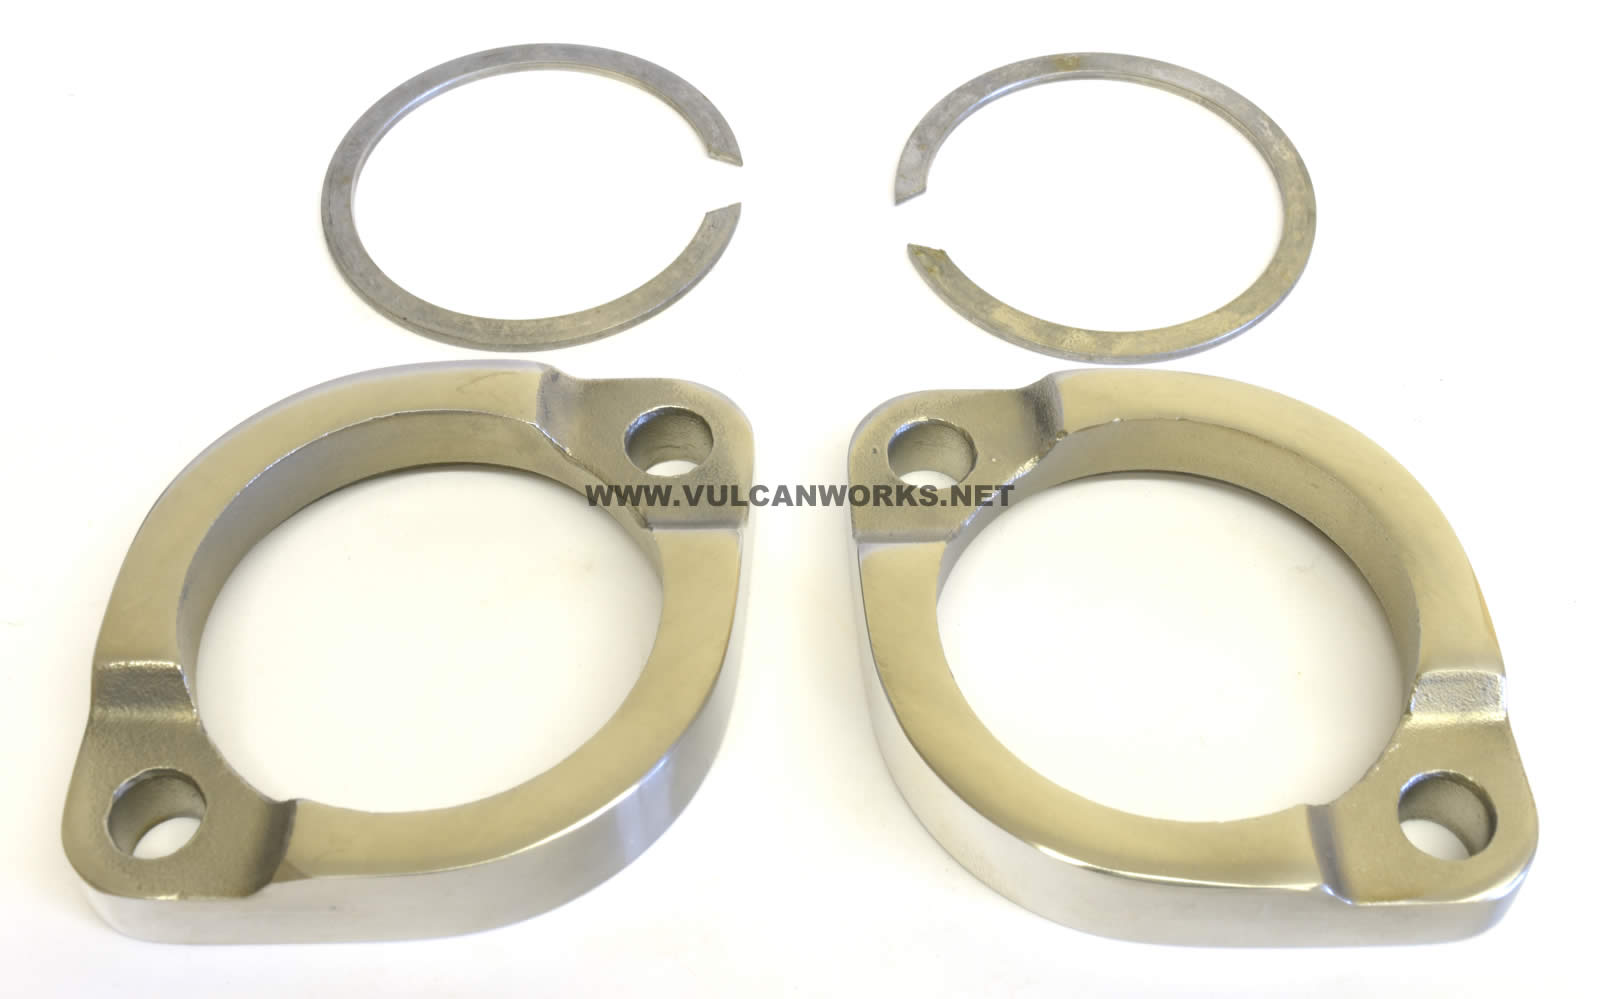 Heavy-Duty Exhaust Flange Kit- Stainless Steel